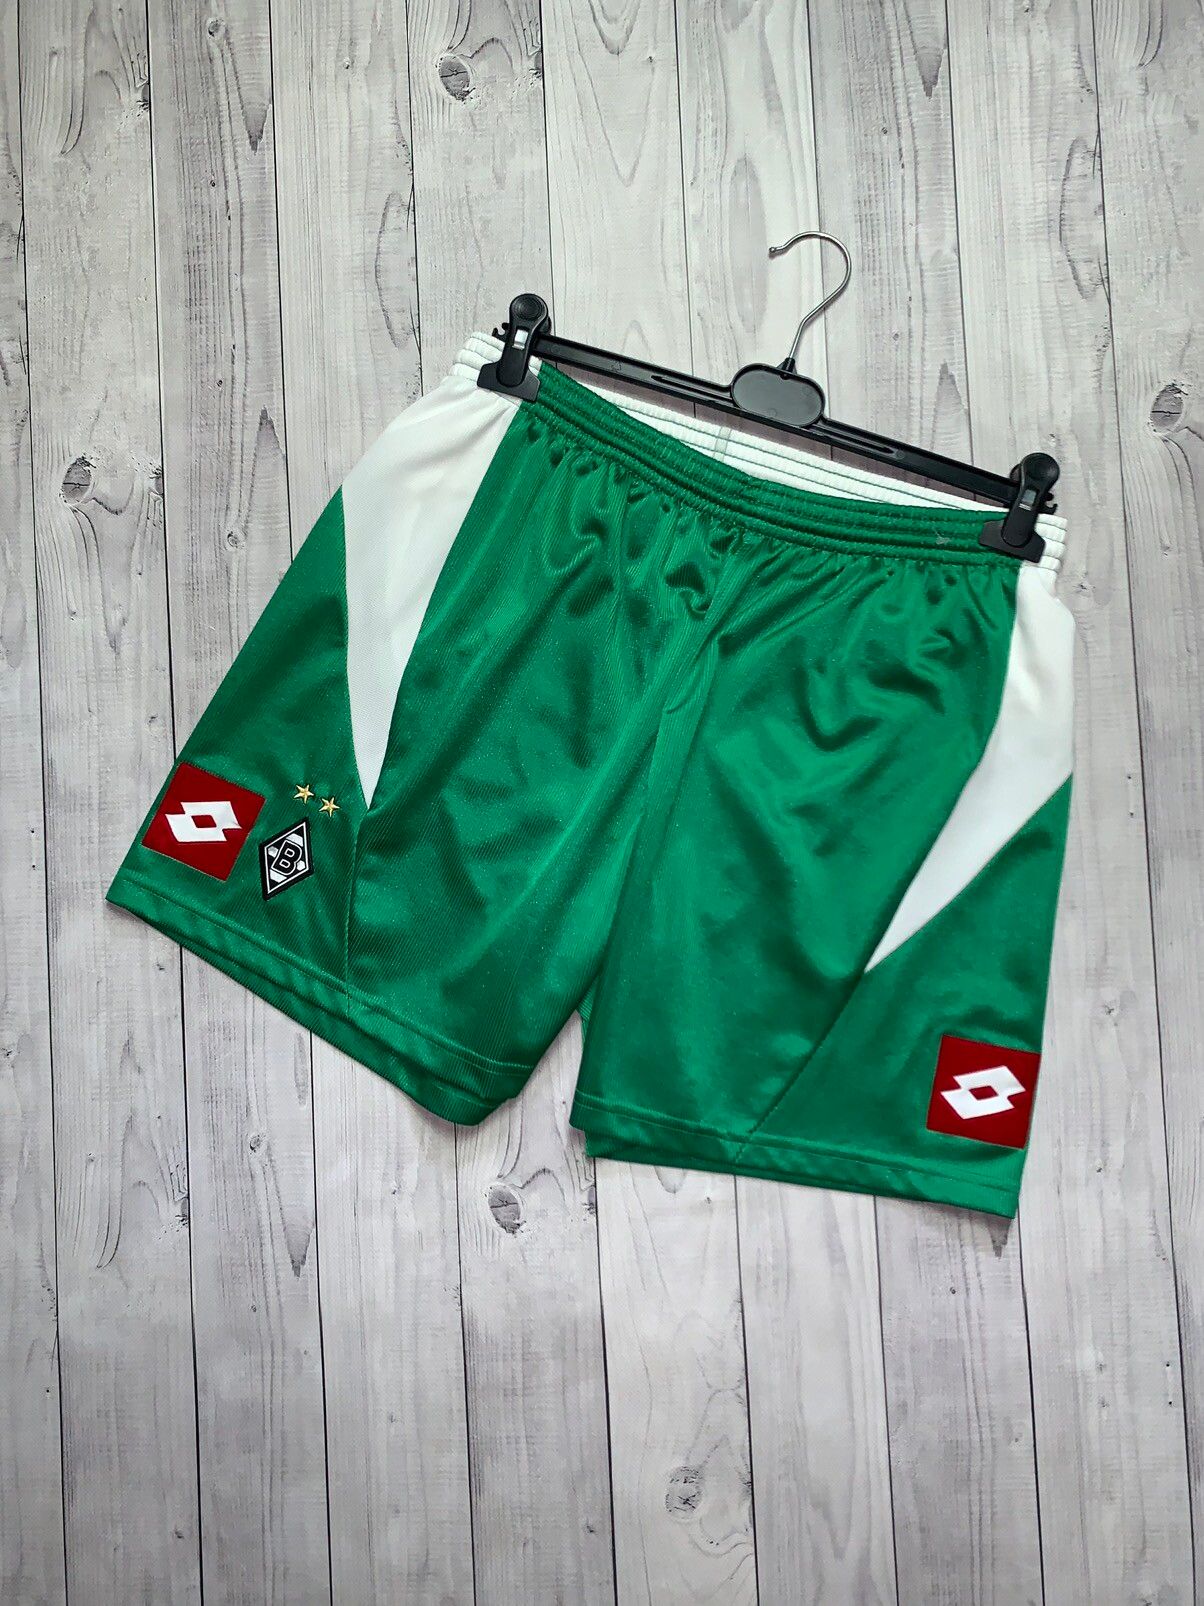 Pre-owned Lotto X Soccer Jersey Vintage Soccer Shorts Borussia Mönchengladbach Green Size M